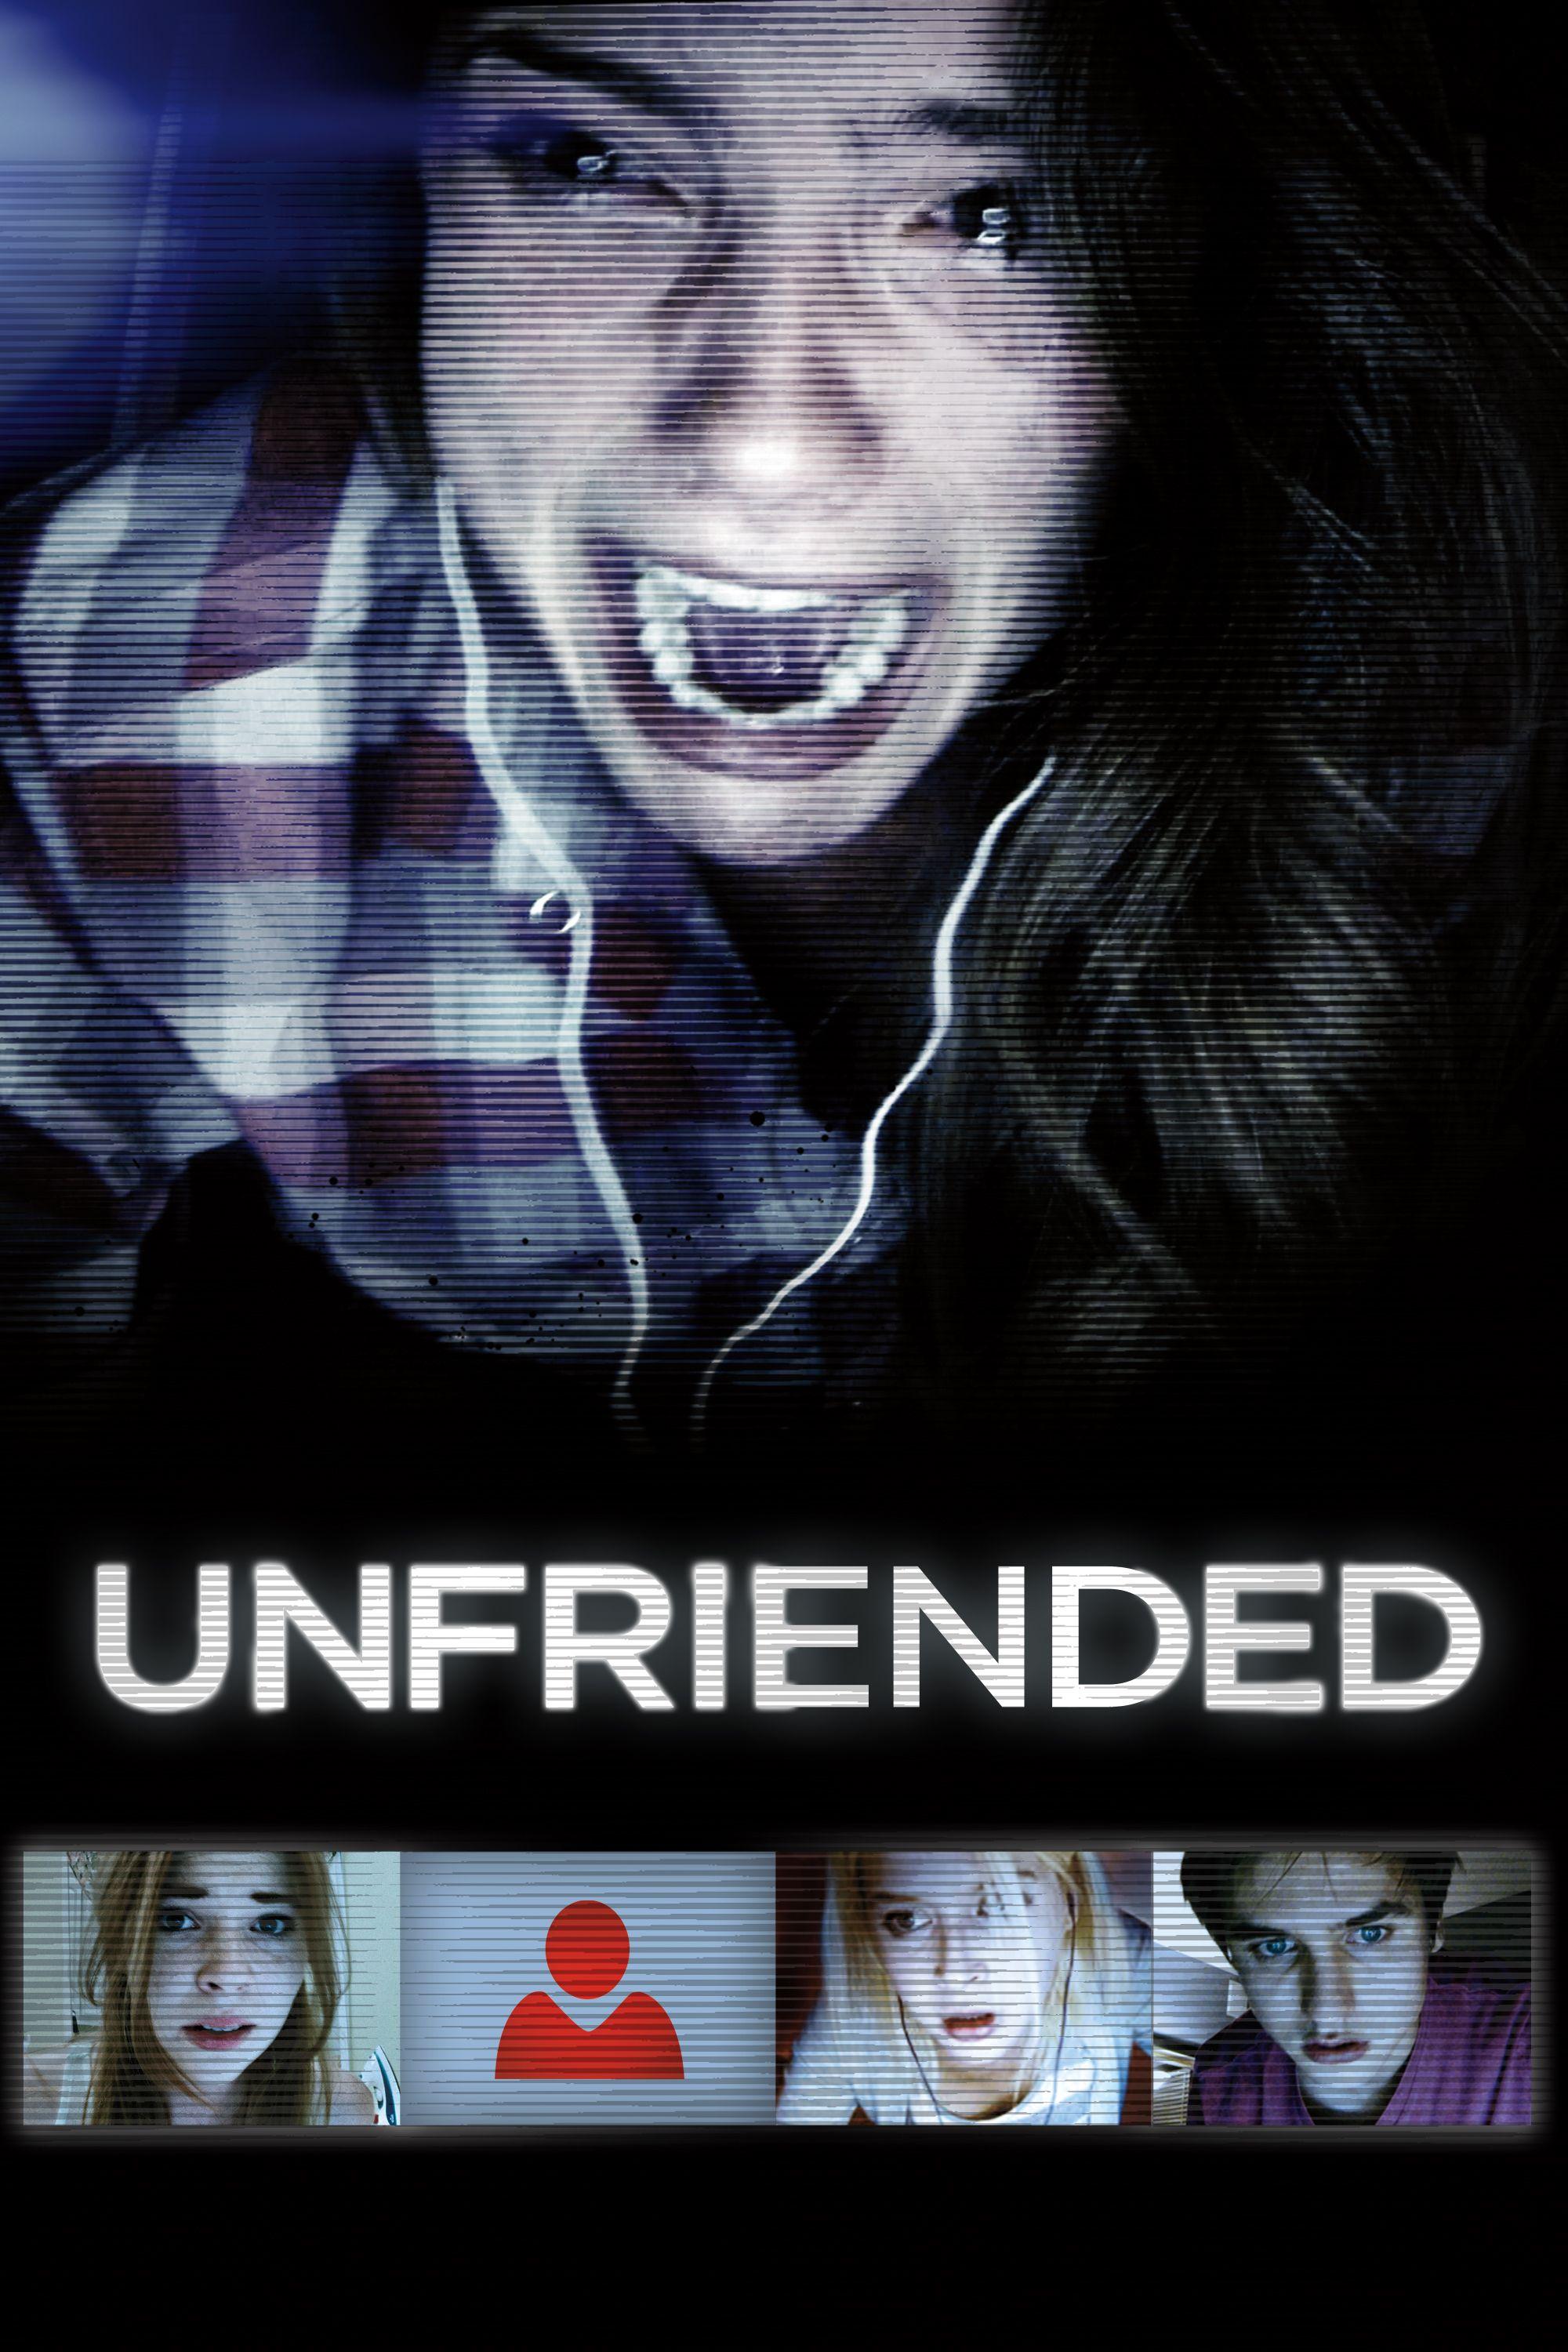 Unfriended: This innovative horror film unfolds entirely on a computer screen during a group video chat. As a group of friends reconnect online, they are haunted by the malevolent spirit of a former classmate who was a victim of cyberbullying.